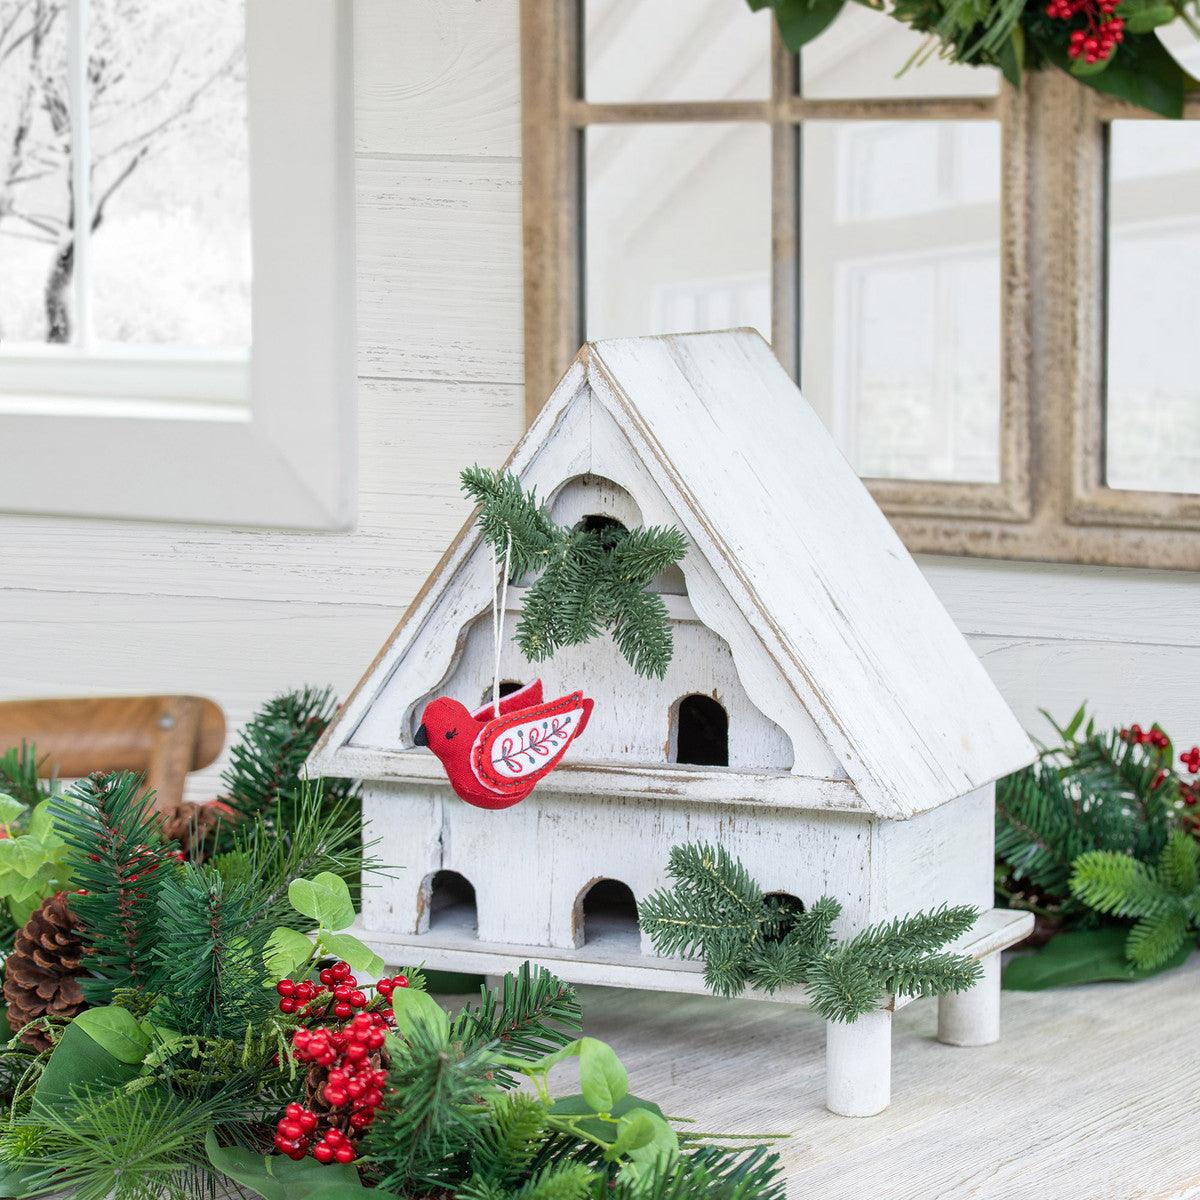 Nuthatch Birdhouse - Signastyle Boutique